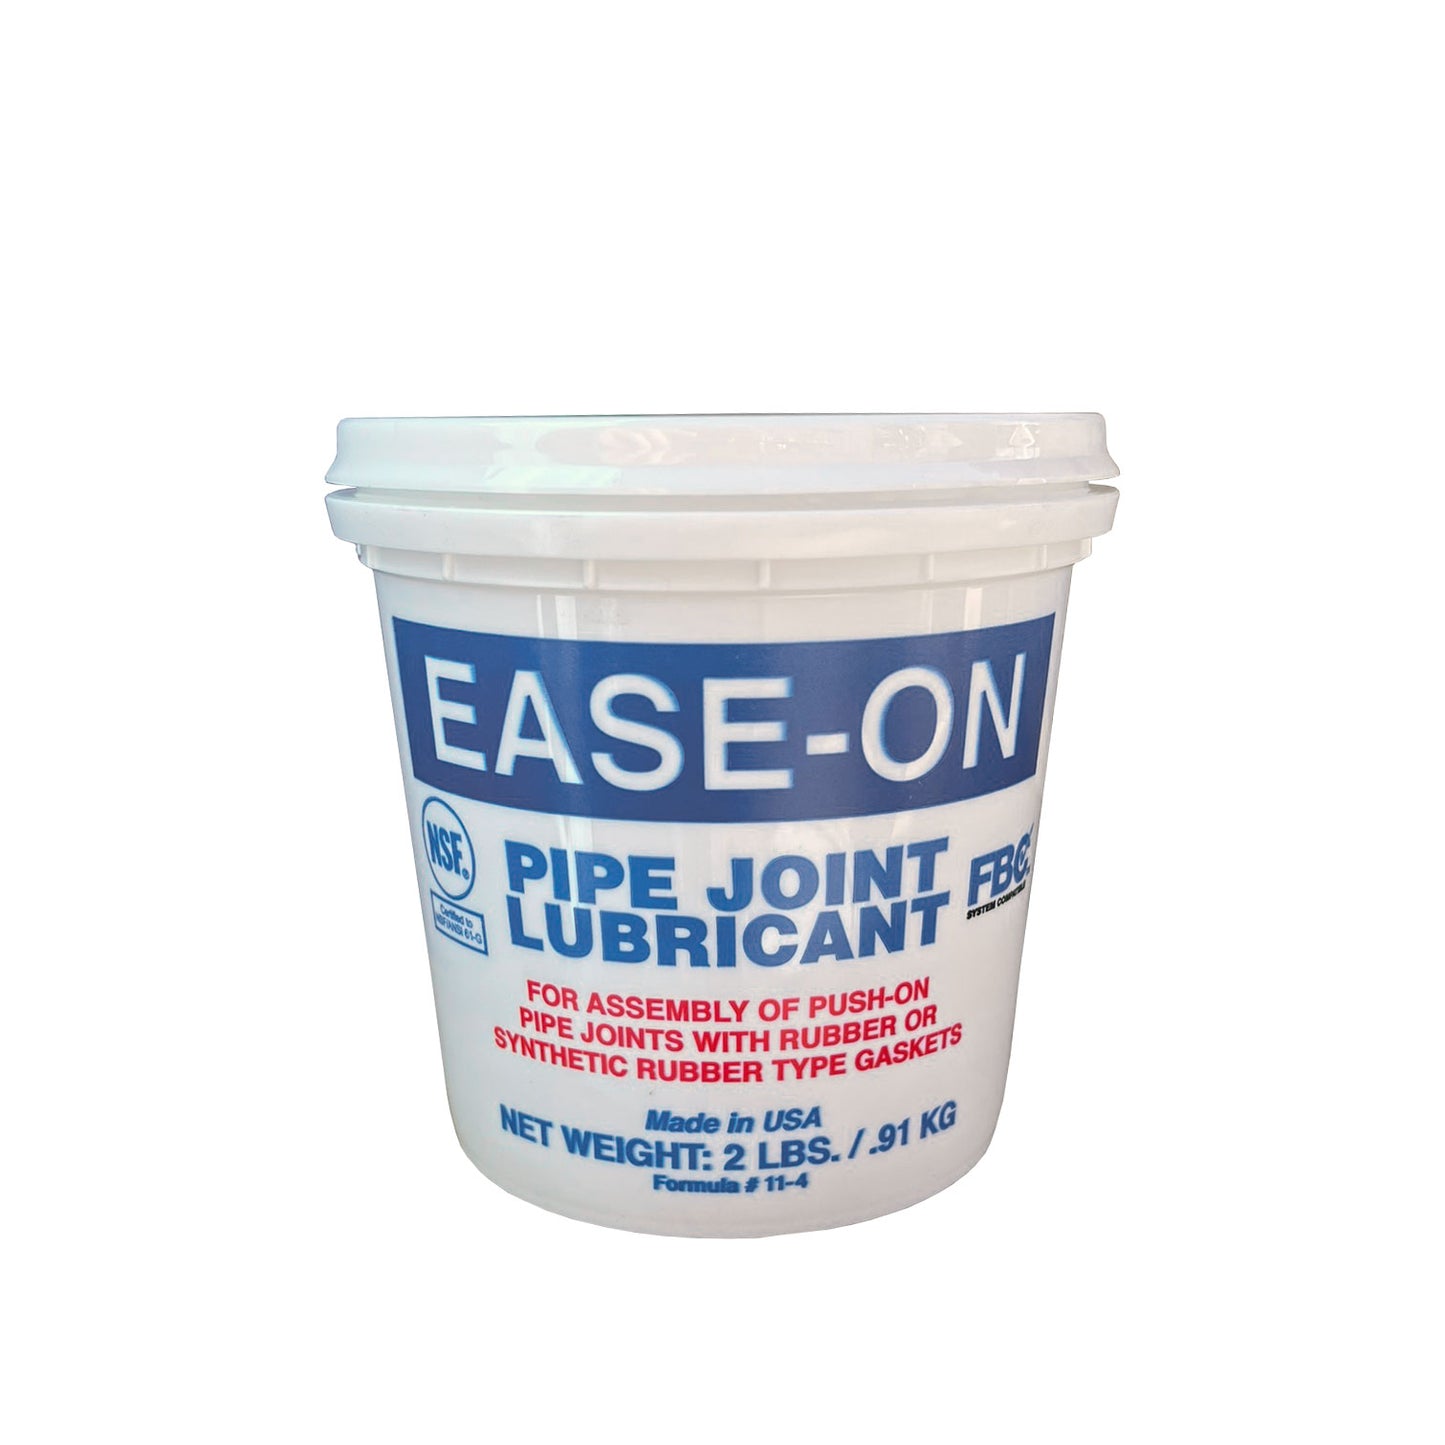 Ease-On Water Dispersible Pipe Joint Lubricant - 2 lbs